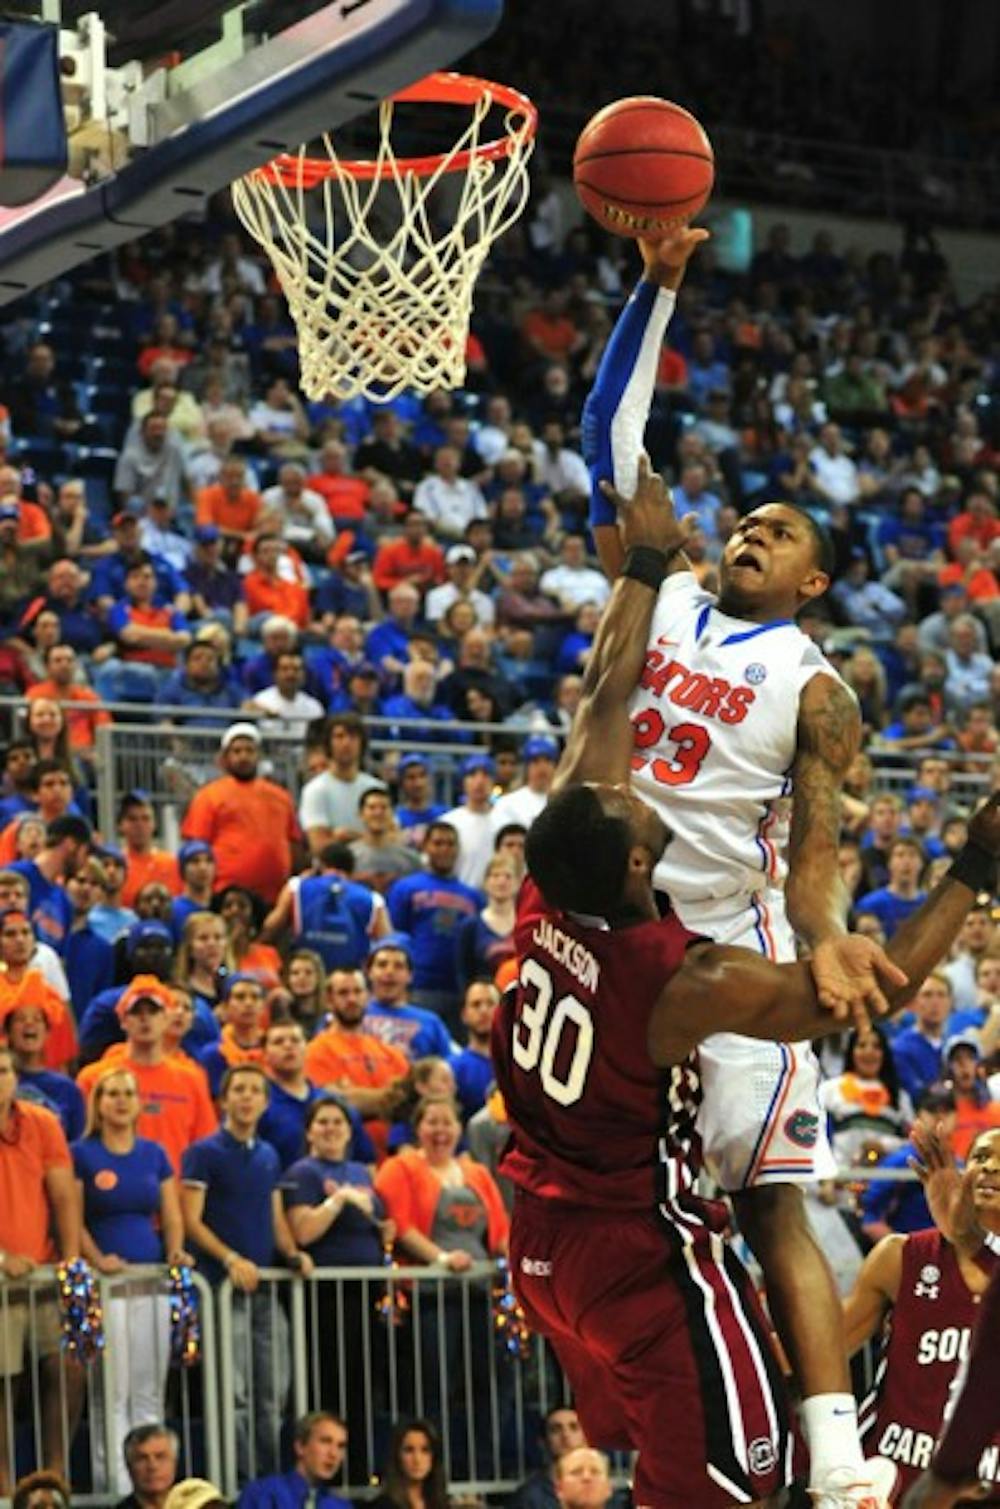 <p>Florida freshman guard Brad Beal scored 17 points and grabbed 11 rebounds Thursday in the Gators’ 74-66 win against South Carolina.</p>